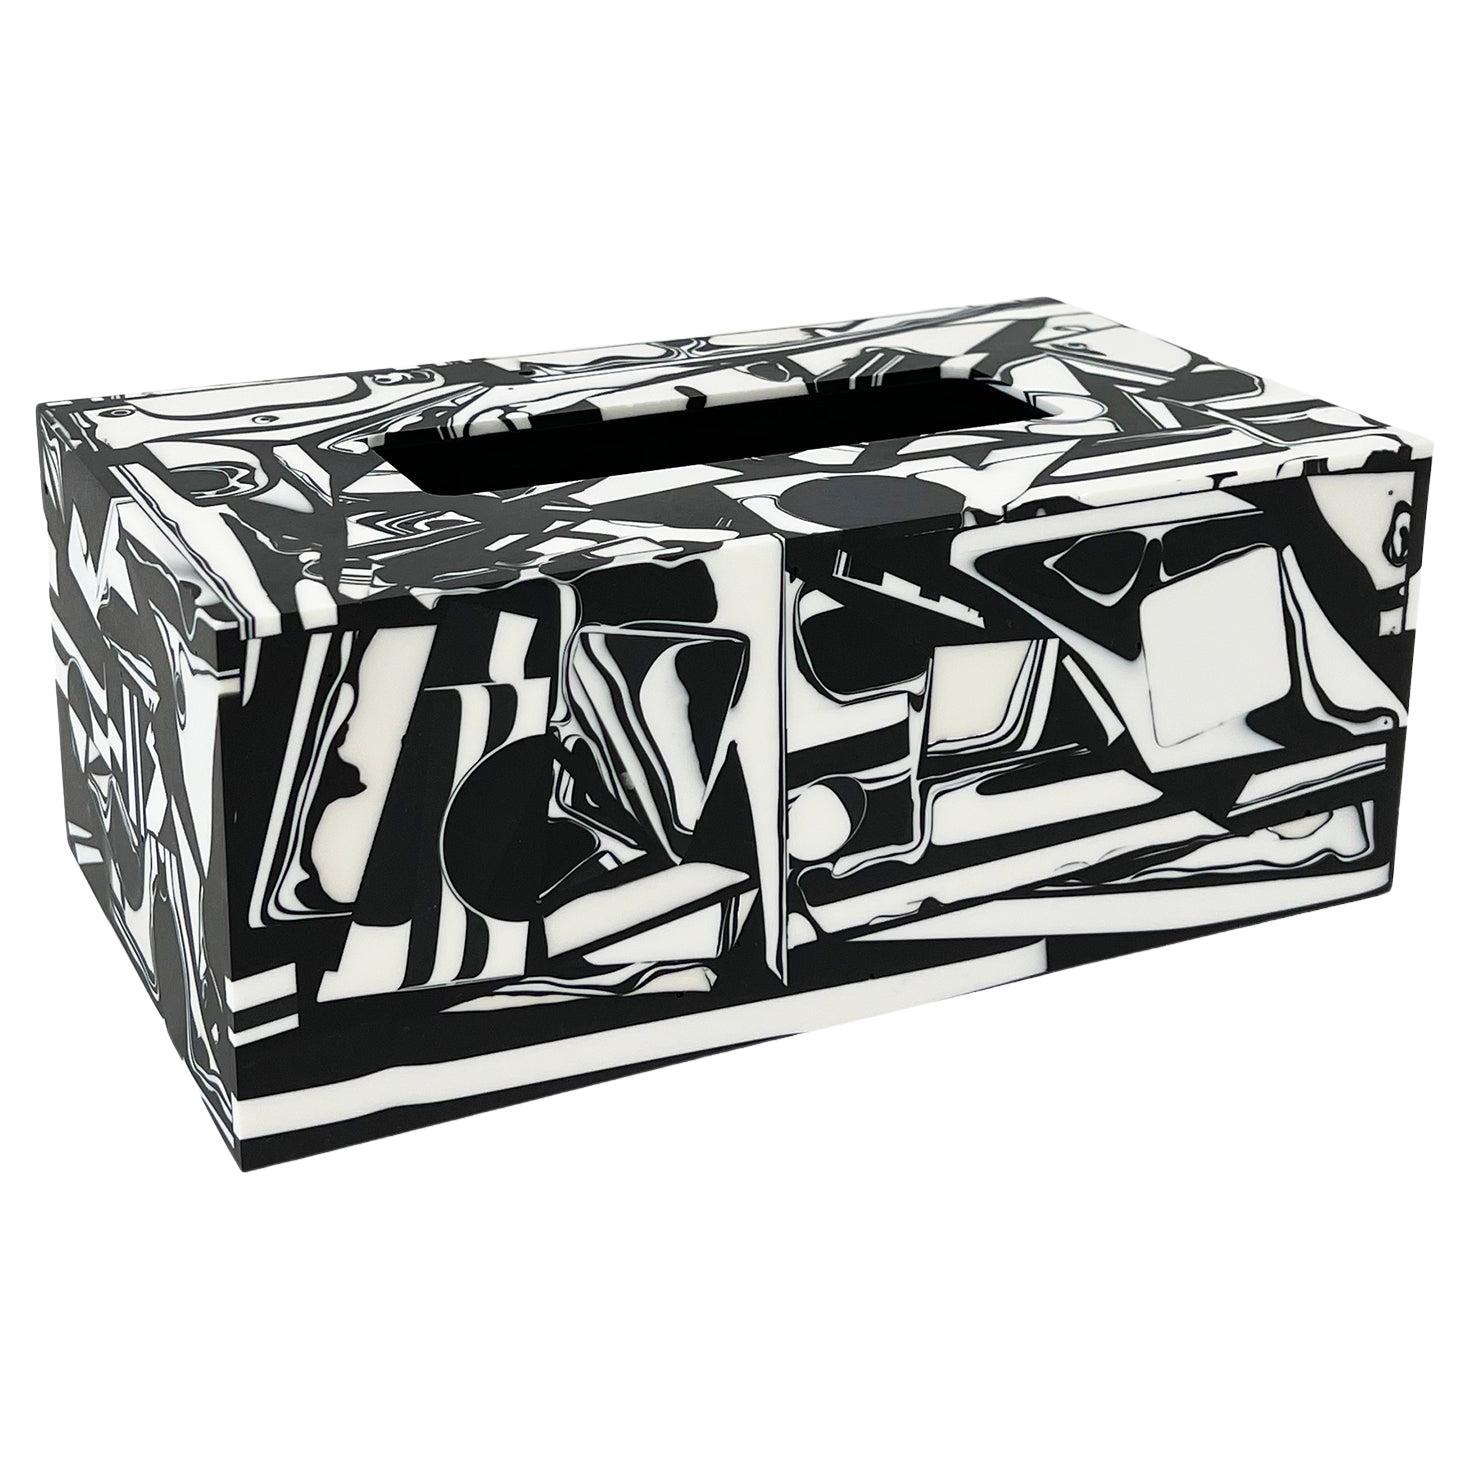 Unique Contemporary Resin Black and White Tissue Box Cover by Elyse Graham